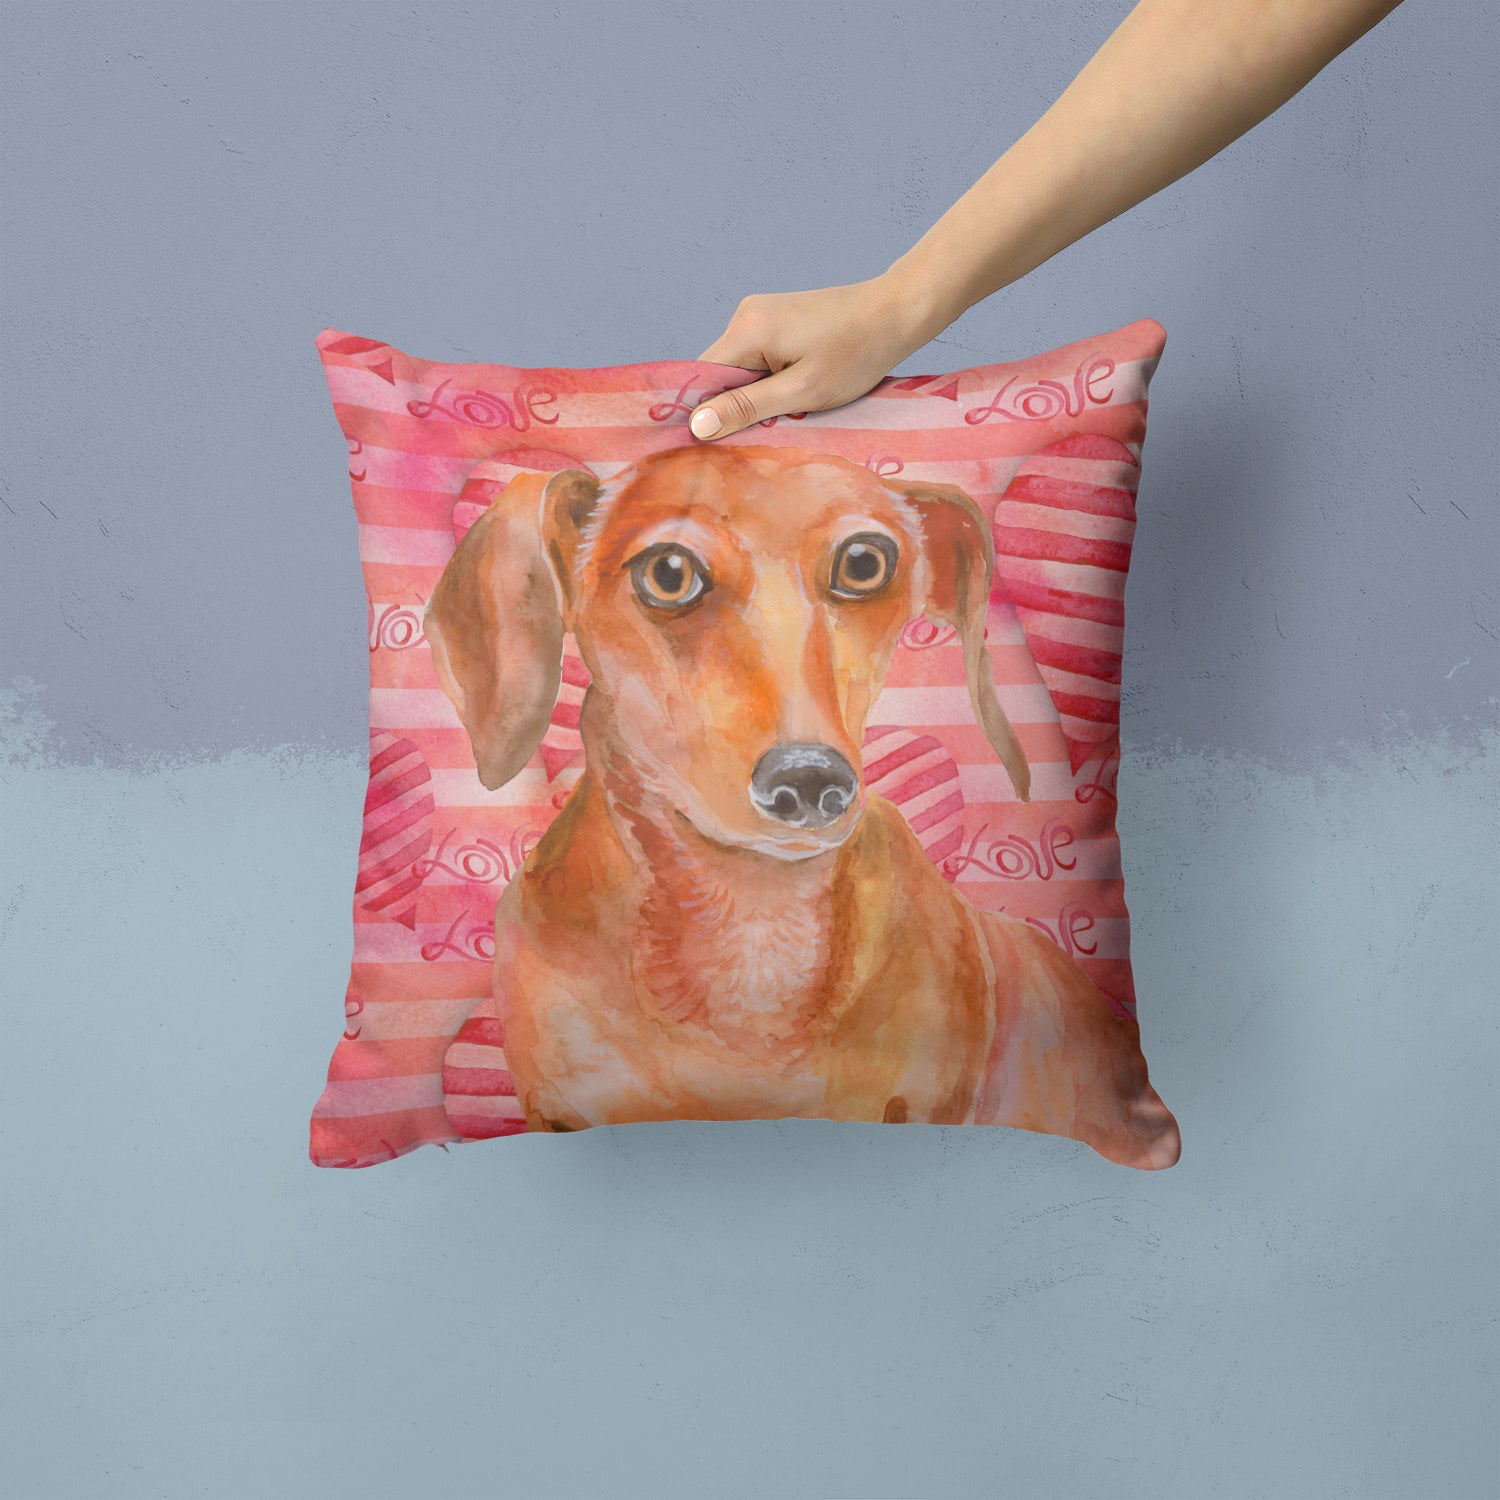 Red Dachshund Love Fabric Decorative Pillow BB9794PW1414 - the-store.com